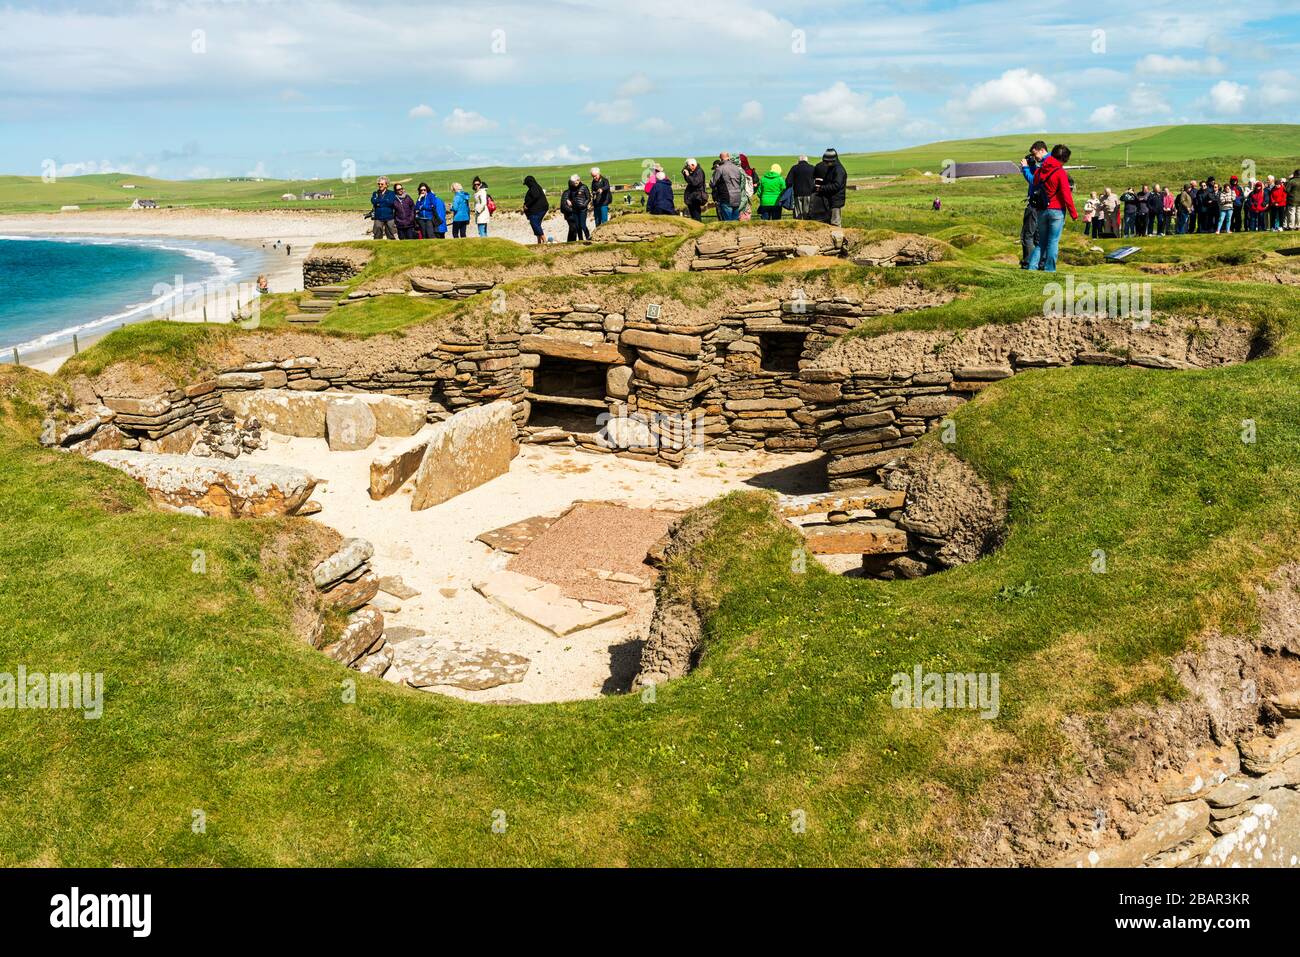 Skara Brae is a Neolithic settlement on the Bay of Skaill, Orkney, Scotland.  It was occupied between 3180 BC and 2500 BC. Stock Photo